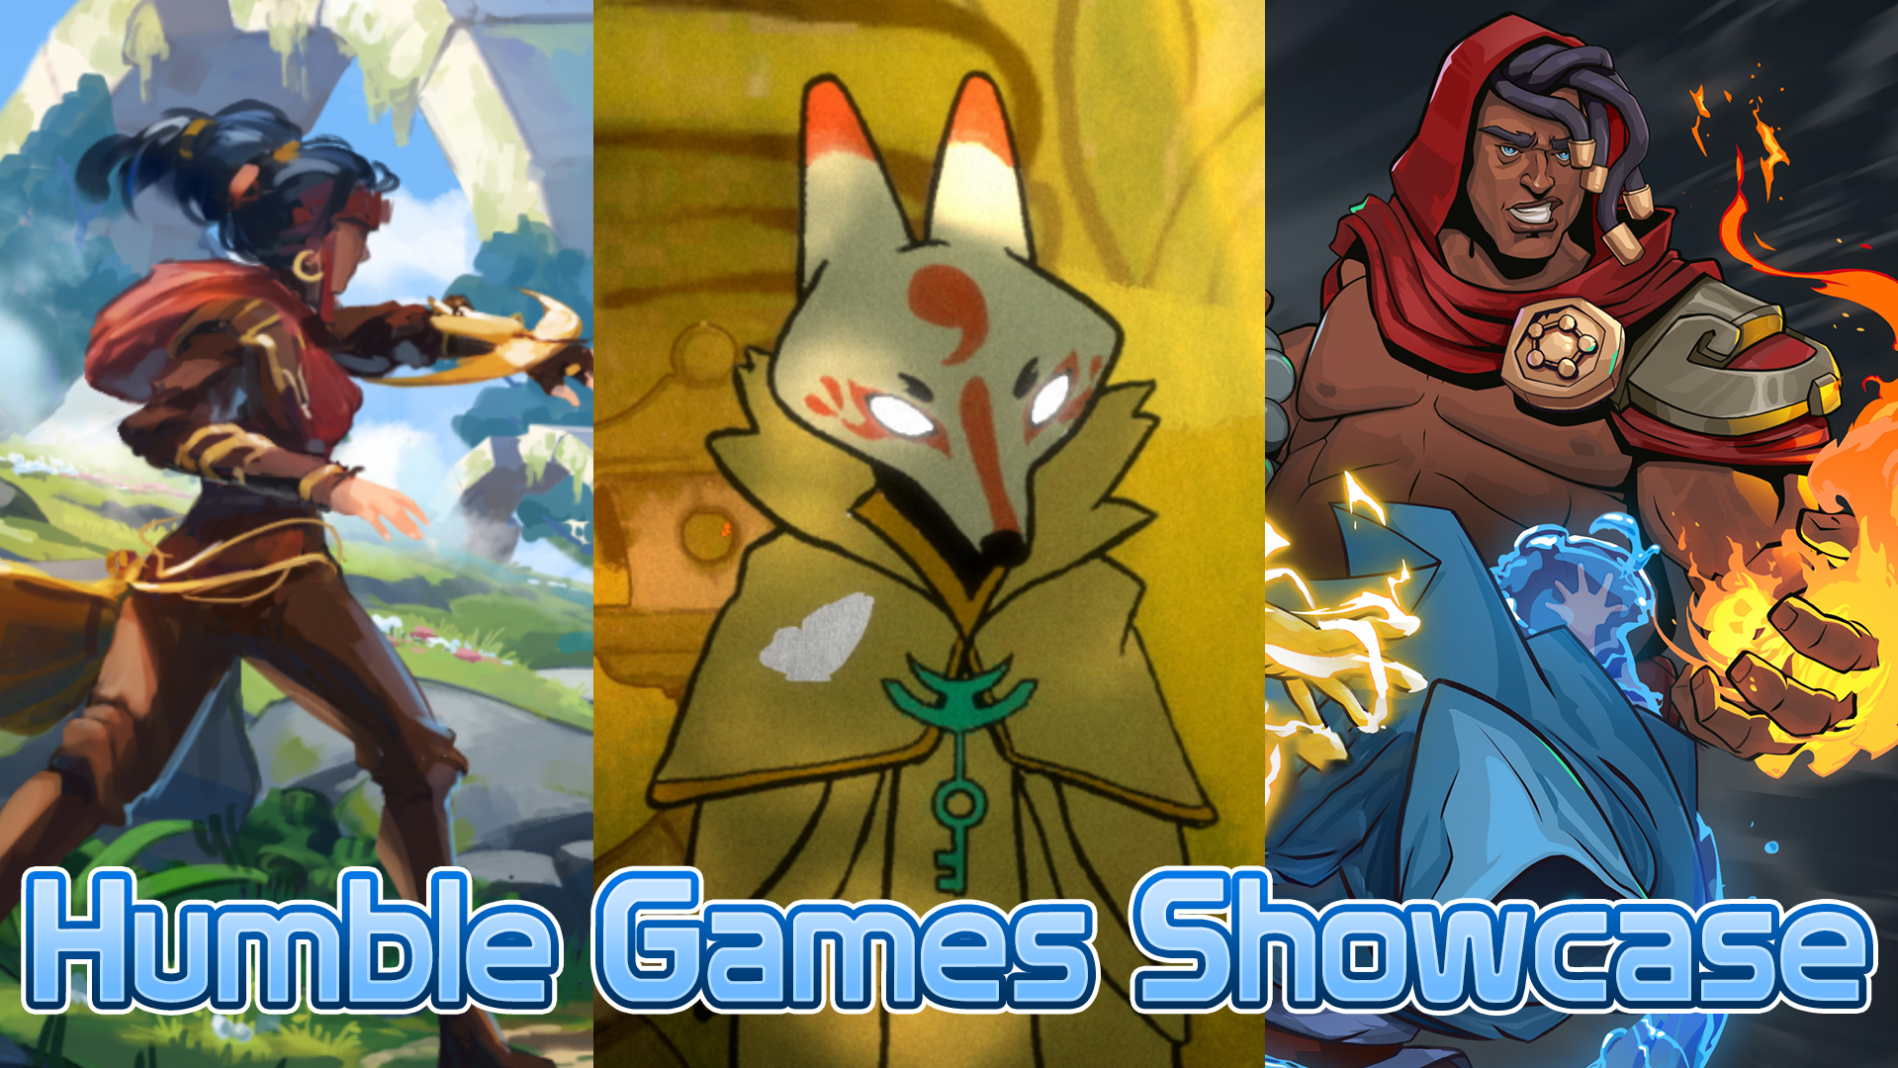 Humble Games Showcase Reveals Wizard of Legend 2, Lost Skies, Bo: Path of the Teal Lotus, and More